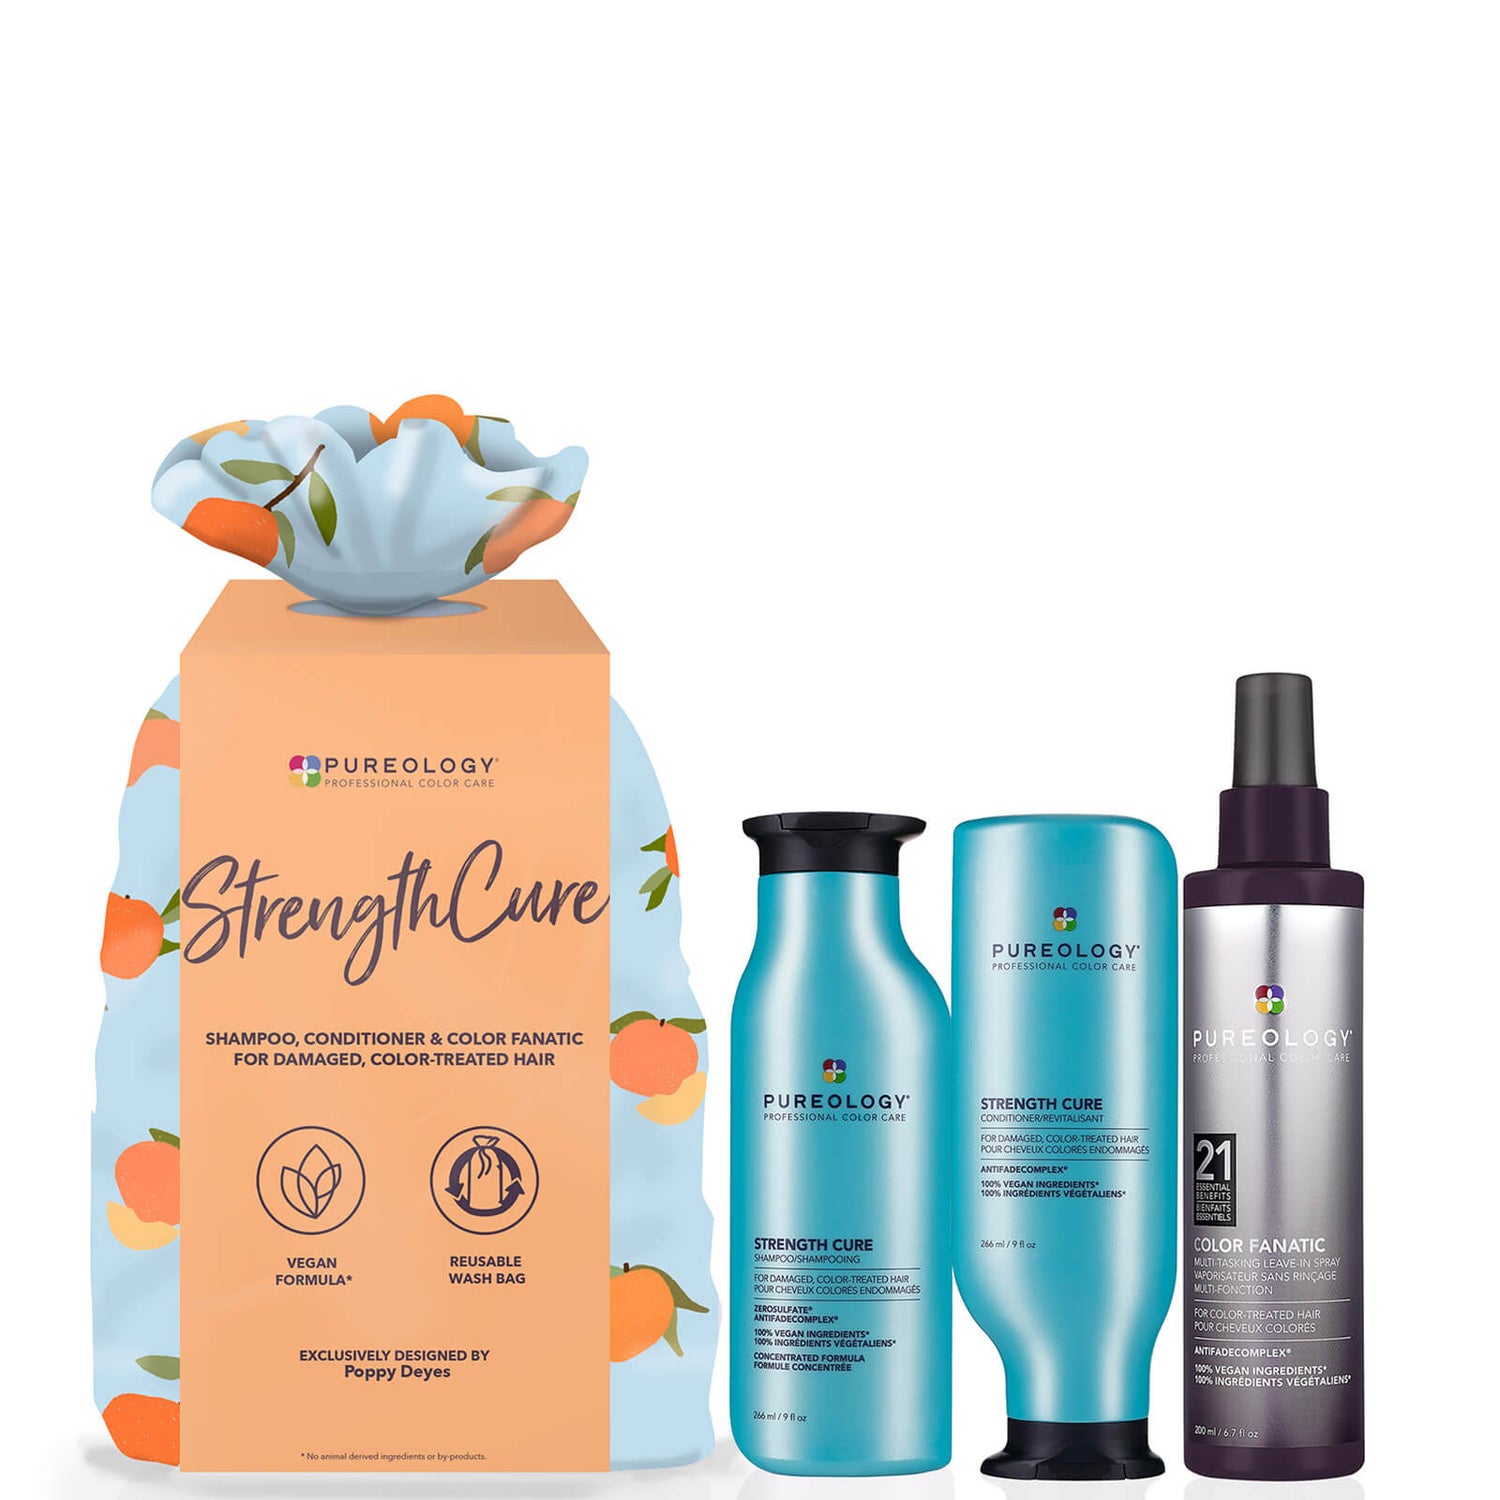 Pureology Strength Cure and Color Fanatic Set (Worth £72.35)